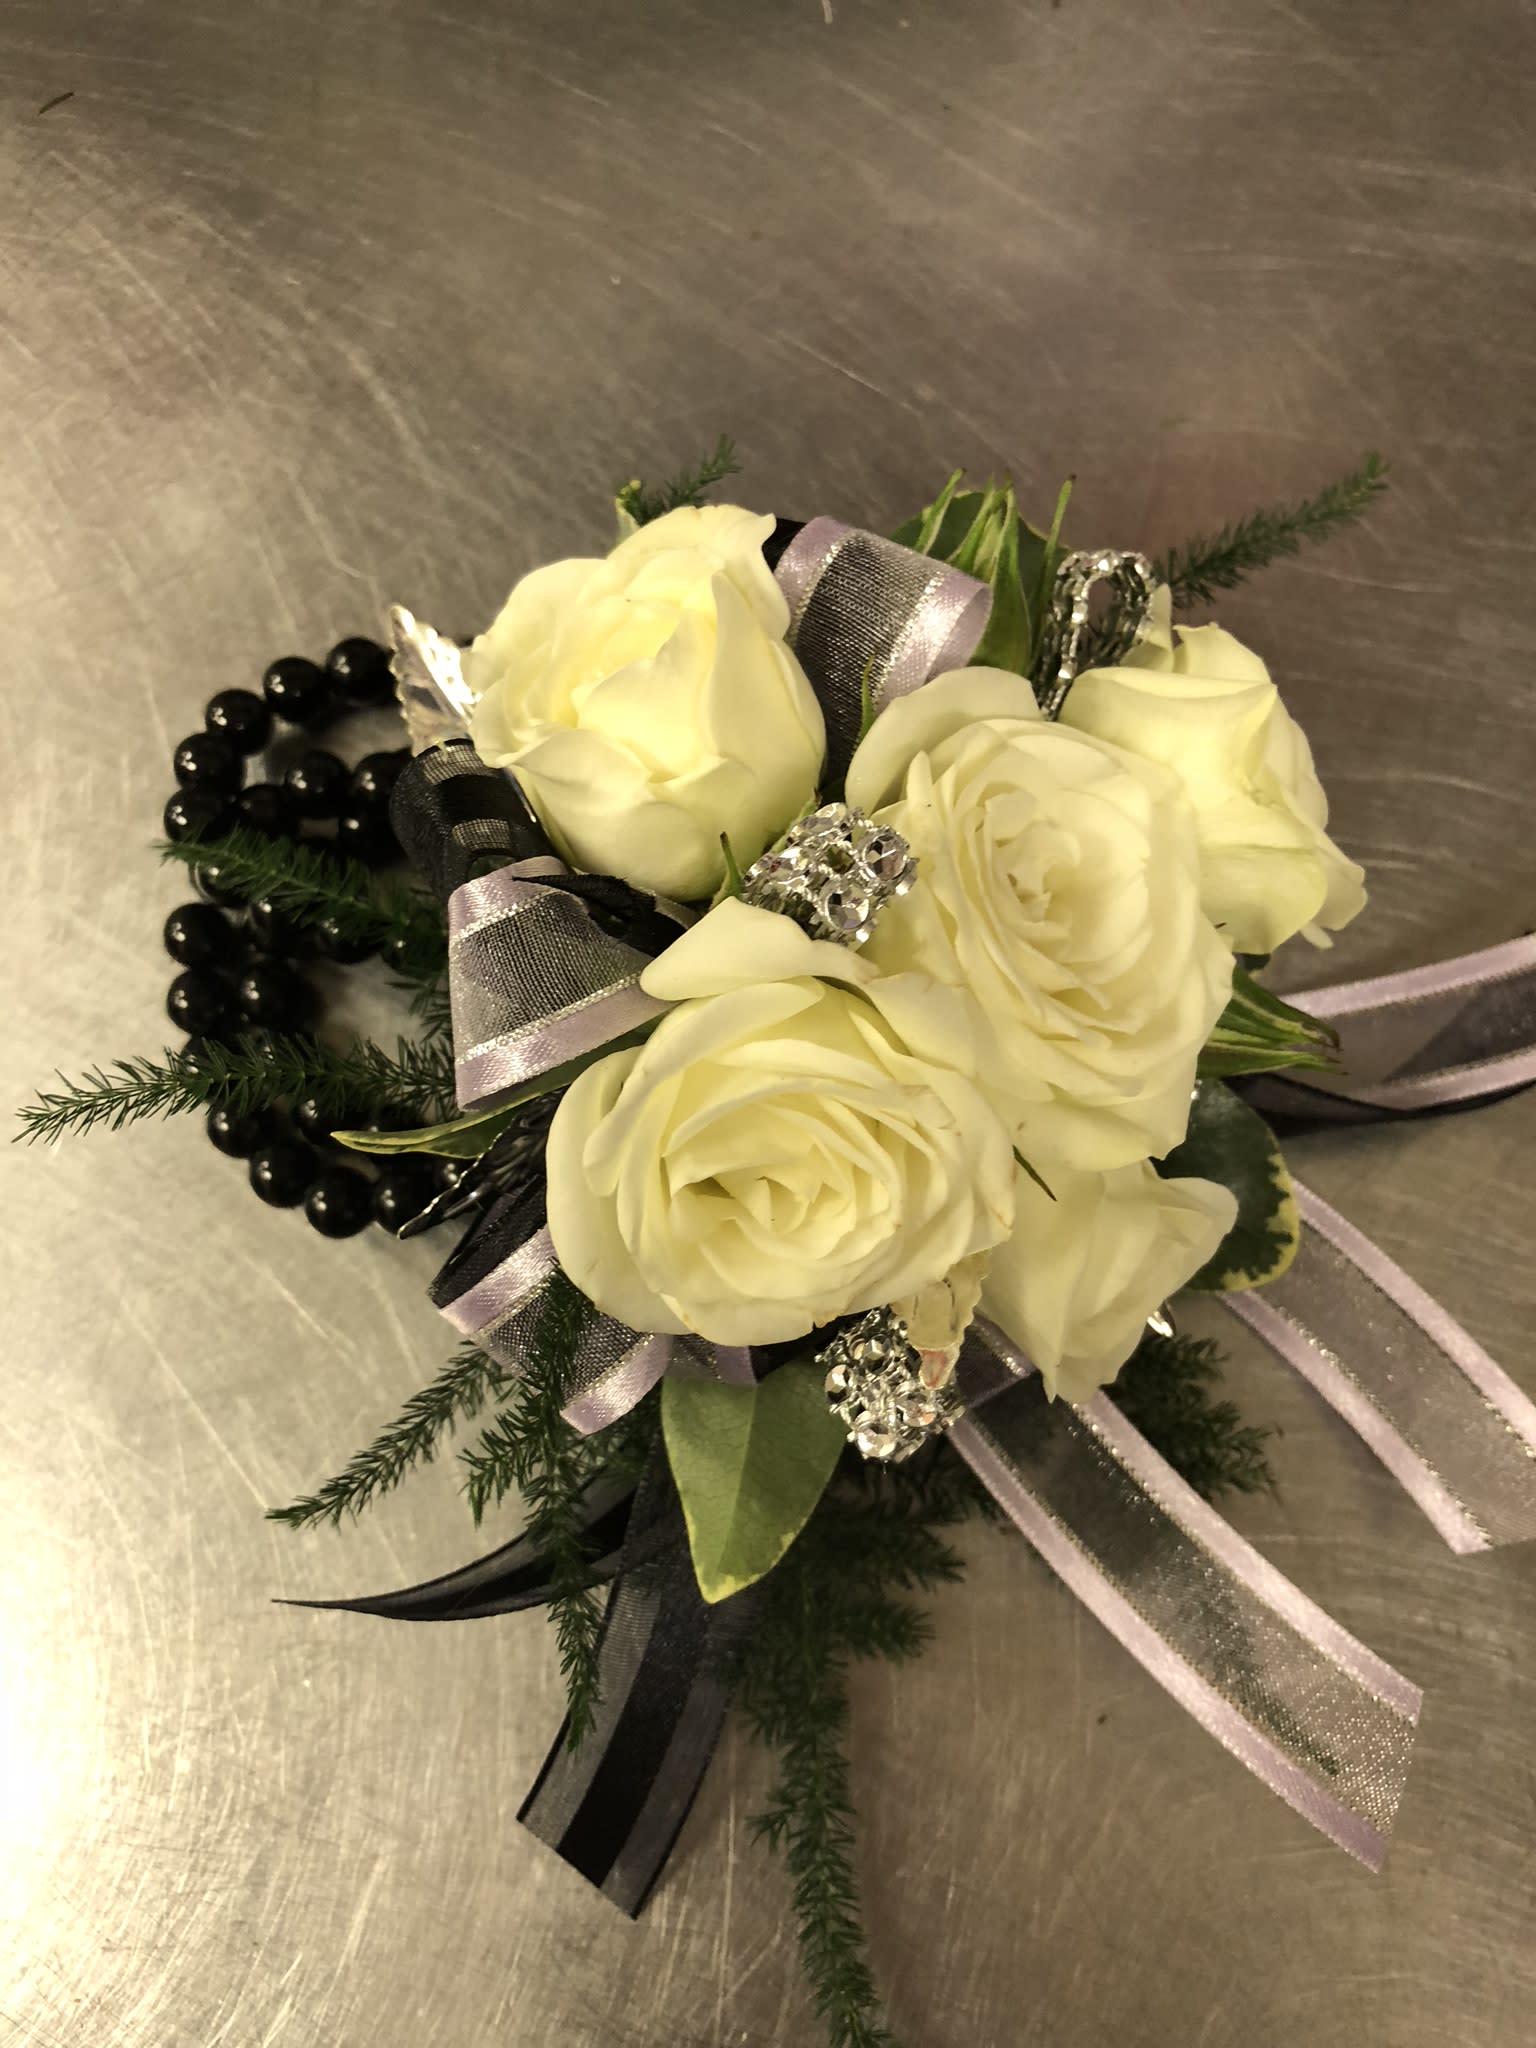 Corsage Black and White - Our corsages are made to order, in the special instruction box let us know what color you would like the flower and the ribbon to be. It also helps to know the dress color and the accent colors (like the color of the jewelry or shoes). Pictured is white ribbon and roses with silver accent rhinestones and a black pearl keepsake bracelet.